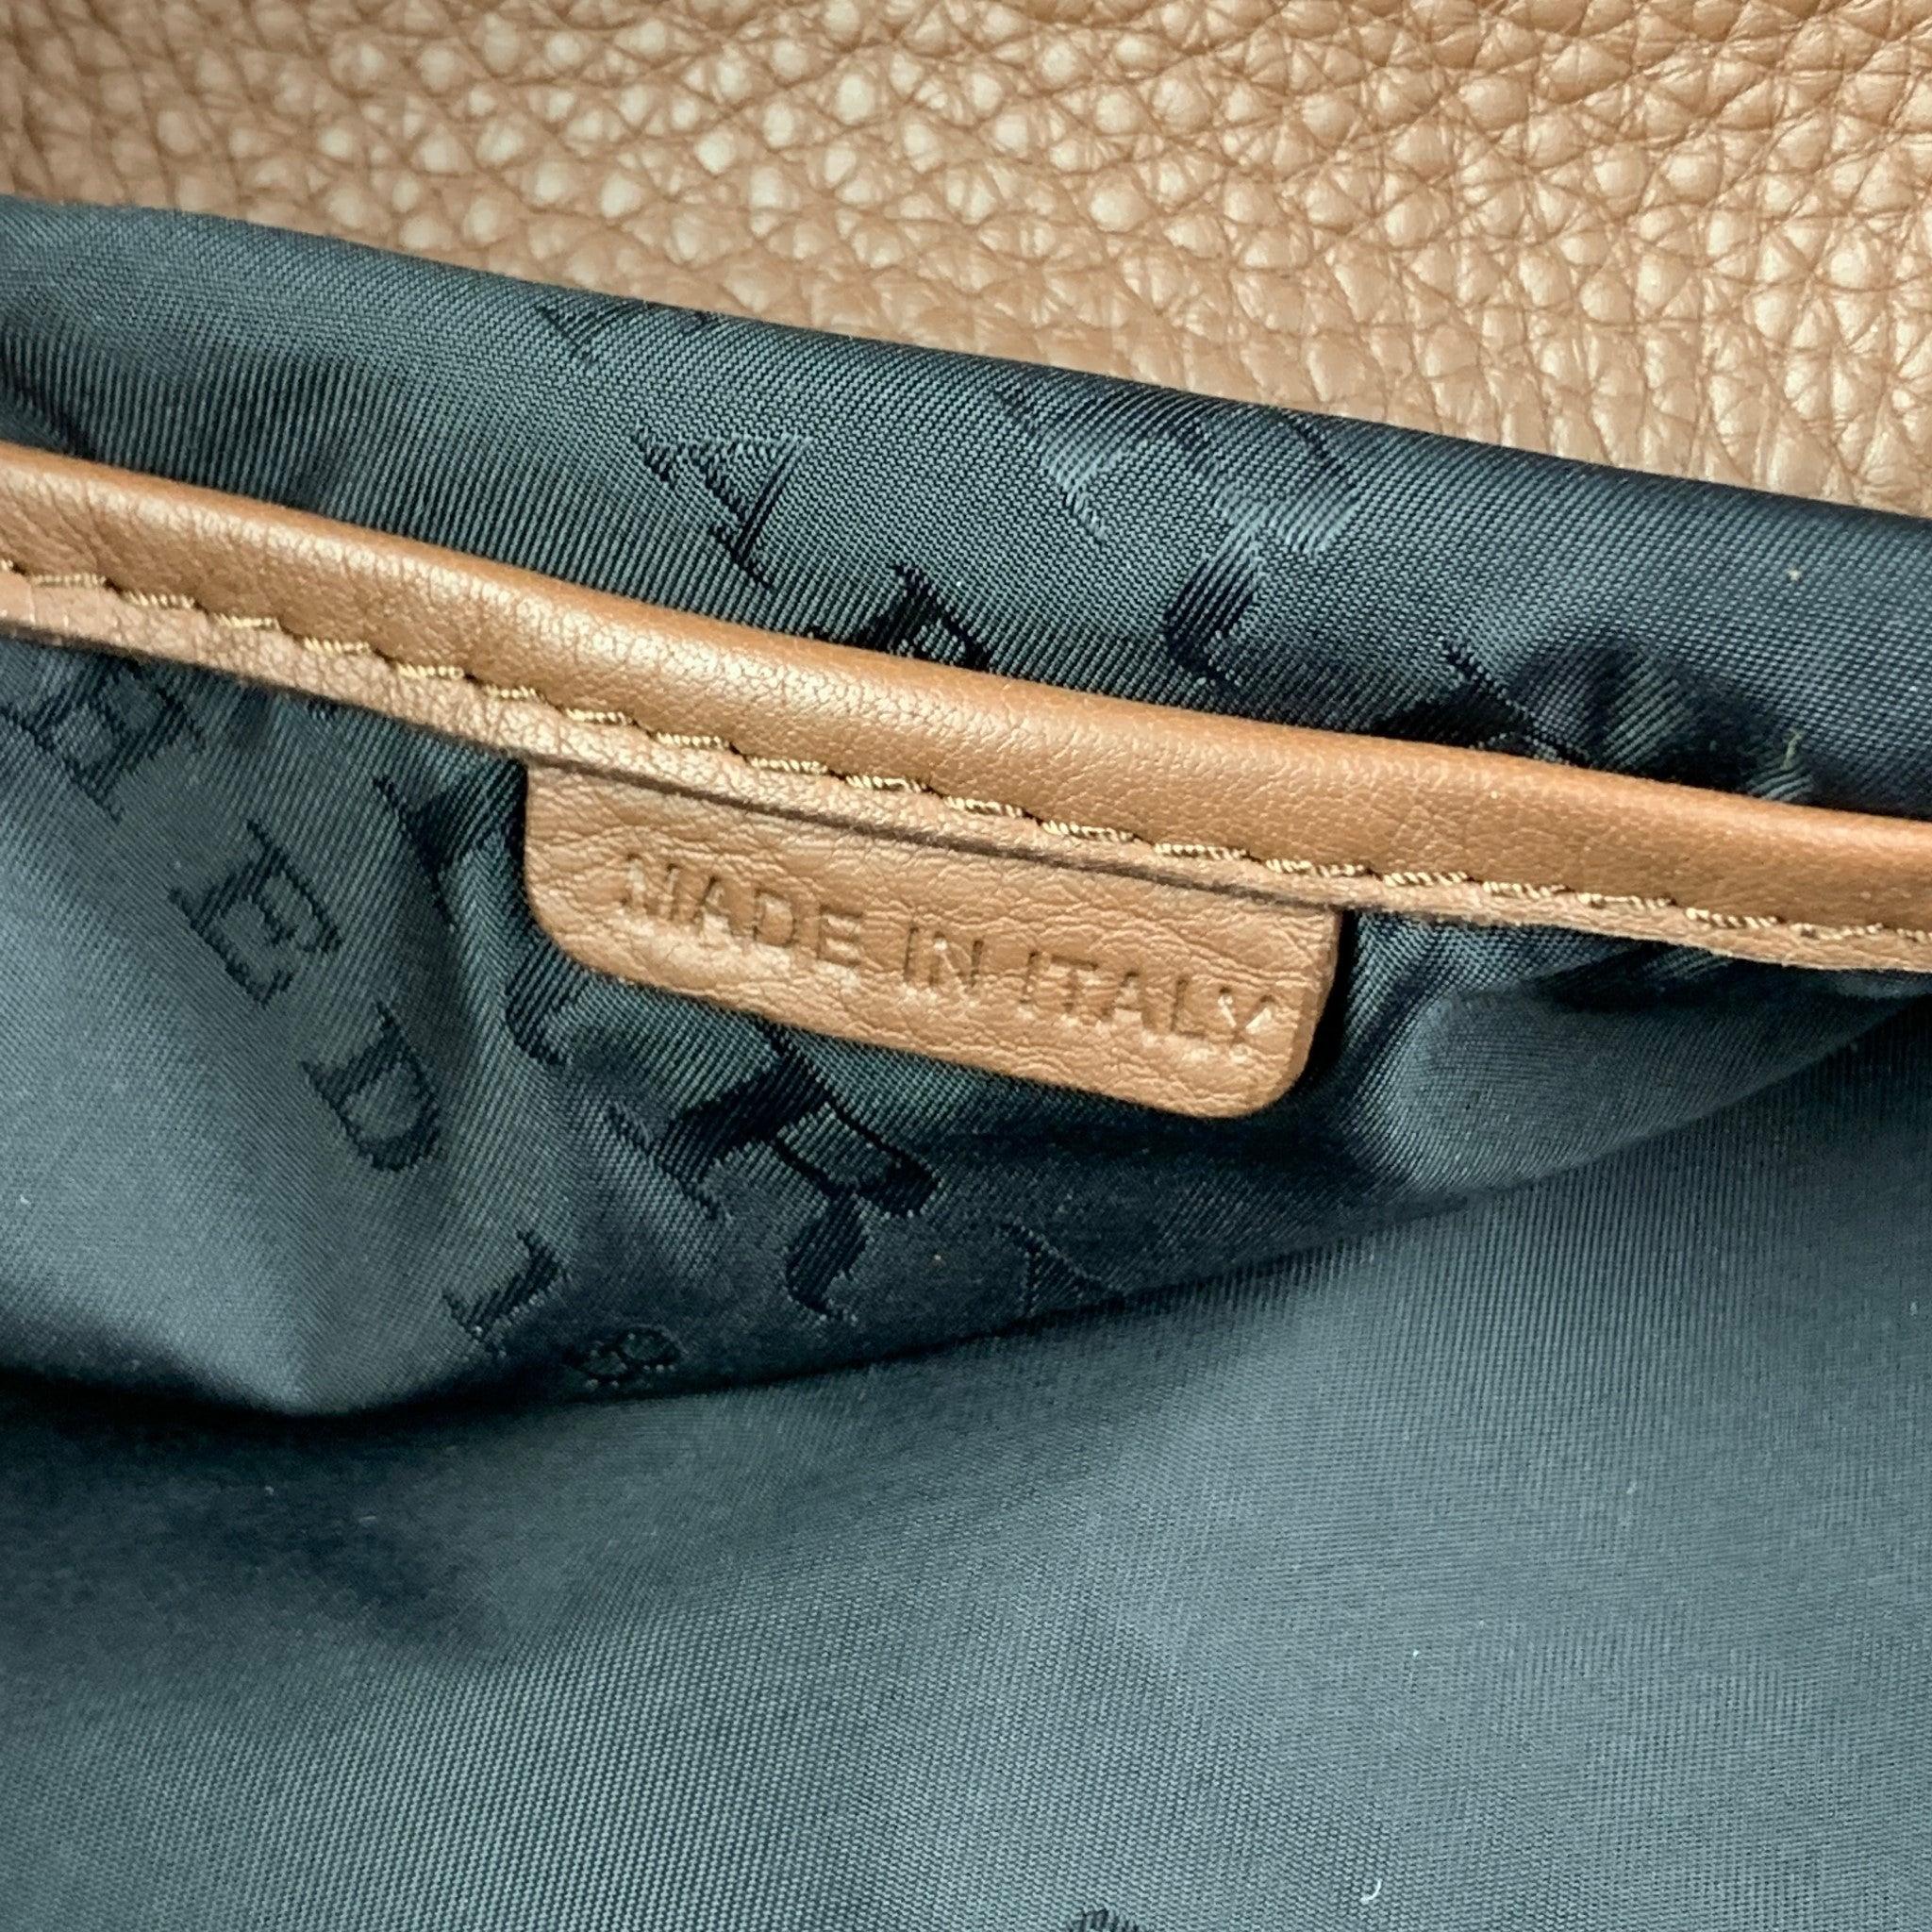 BURBERRY by Christopher Bailey Brown Textured Pebble Grain Leather Messenger Bag For Sale 4